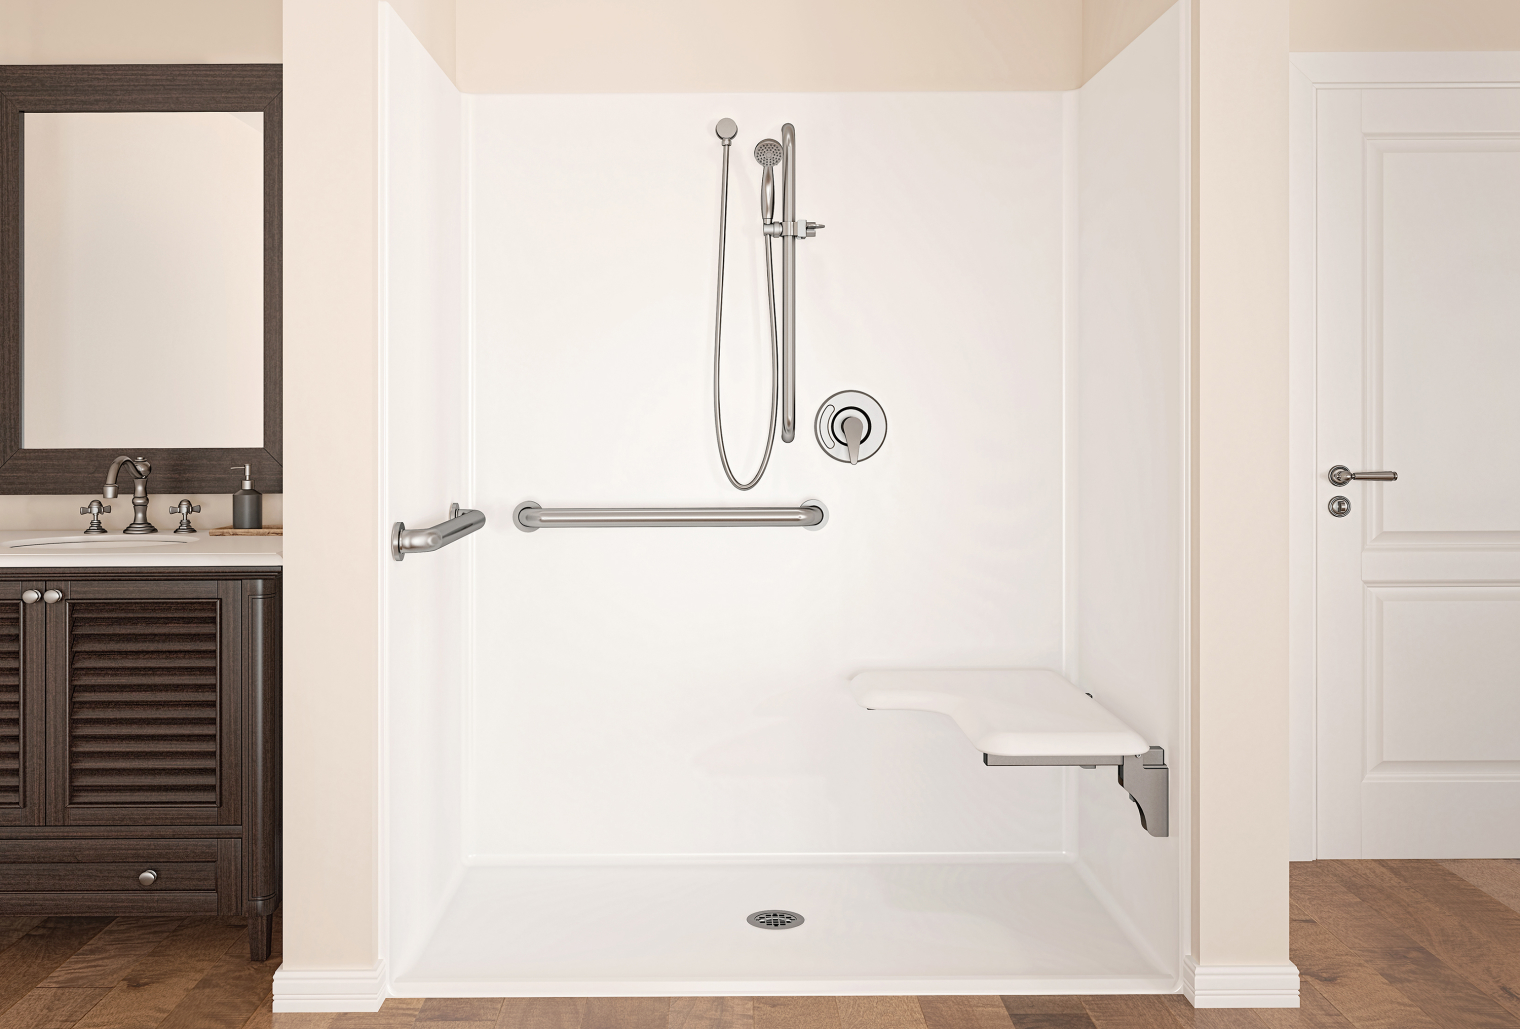 Walk in shower with a seat and chrome railing and faucet.